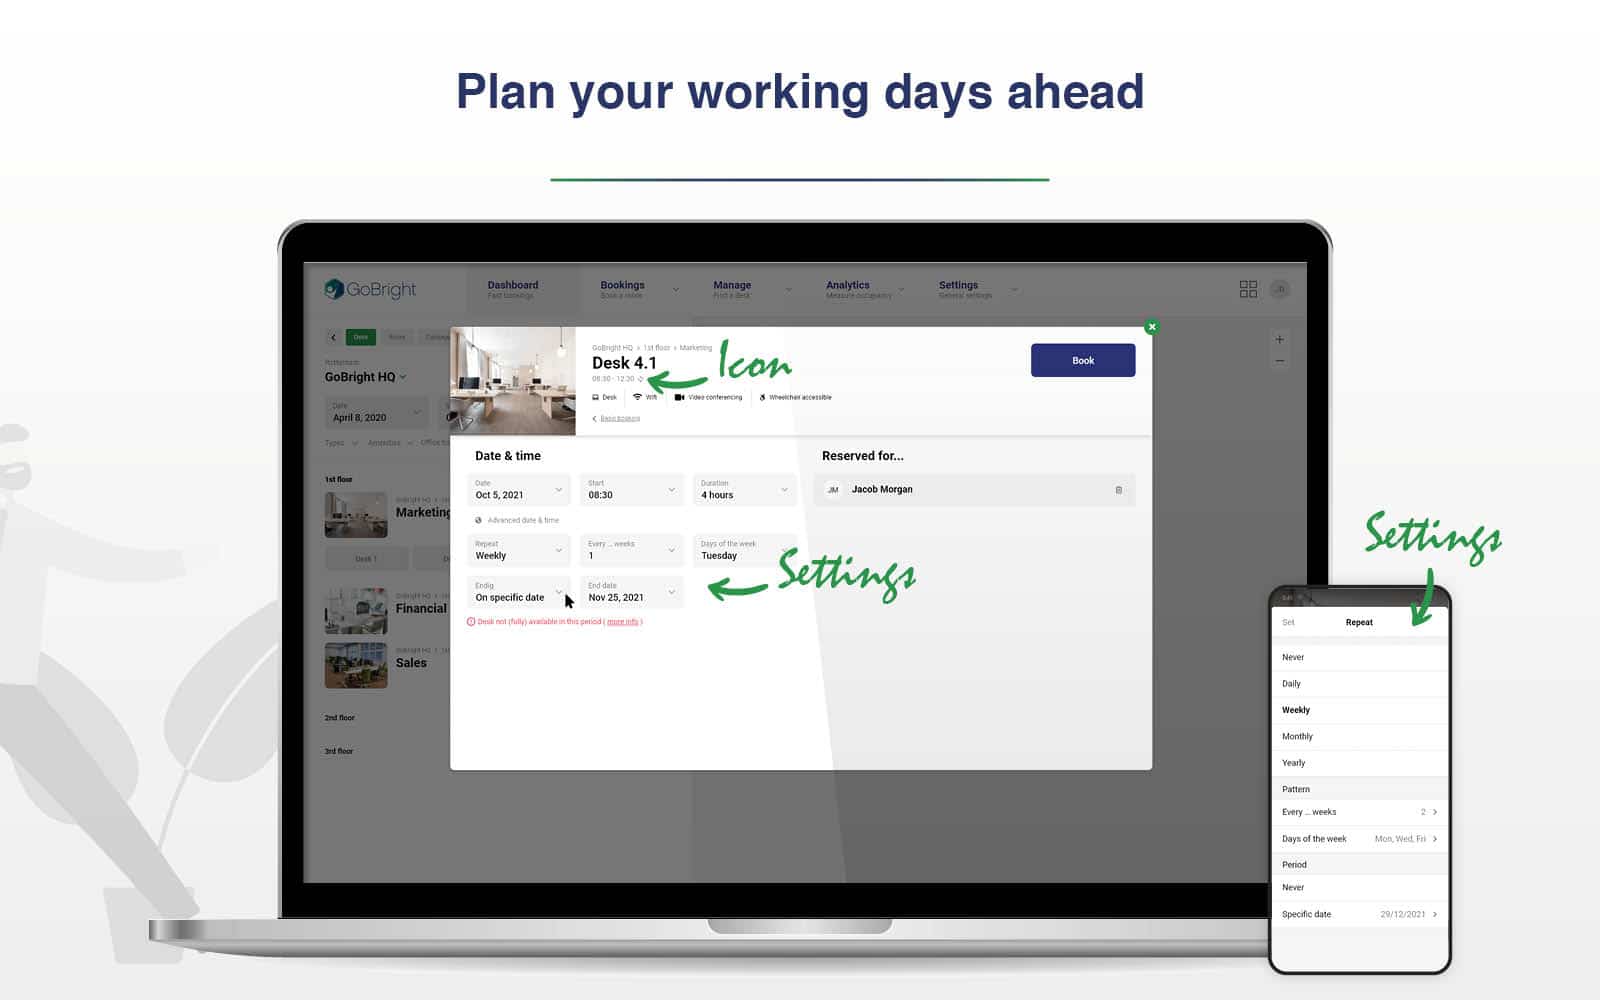 GoBright screenshot - Recurring Bookings - Plan your working days ahead